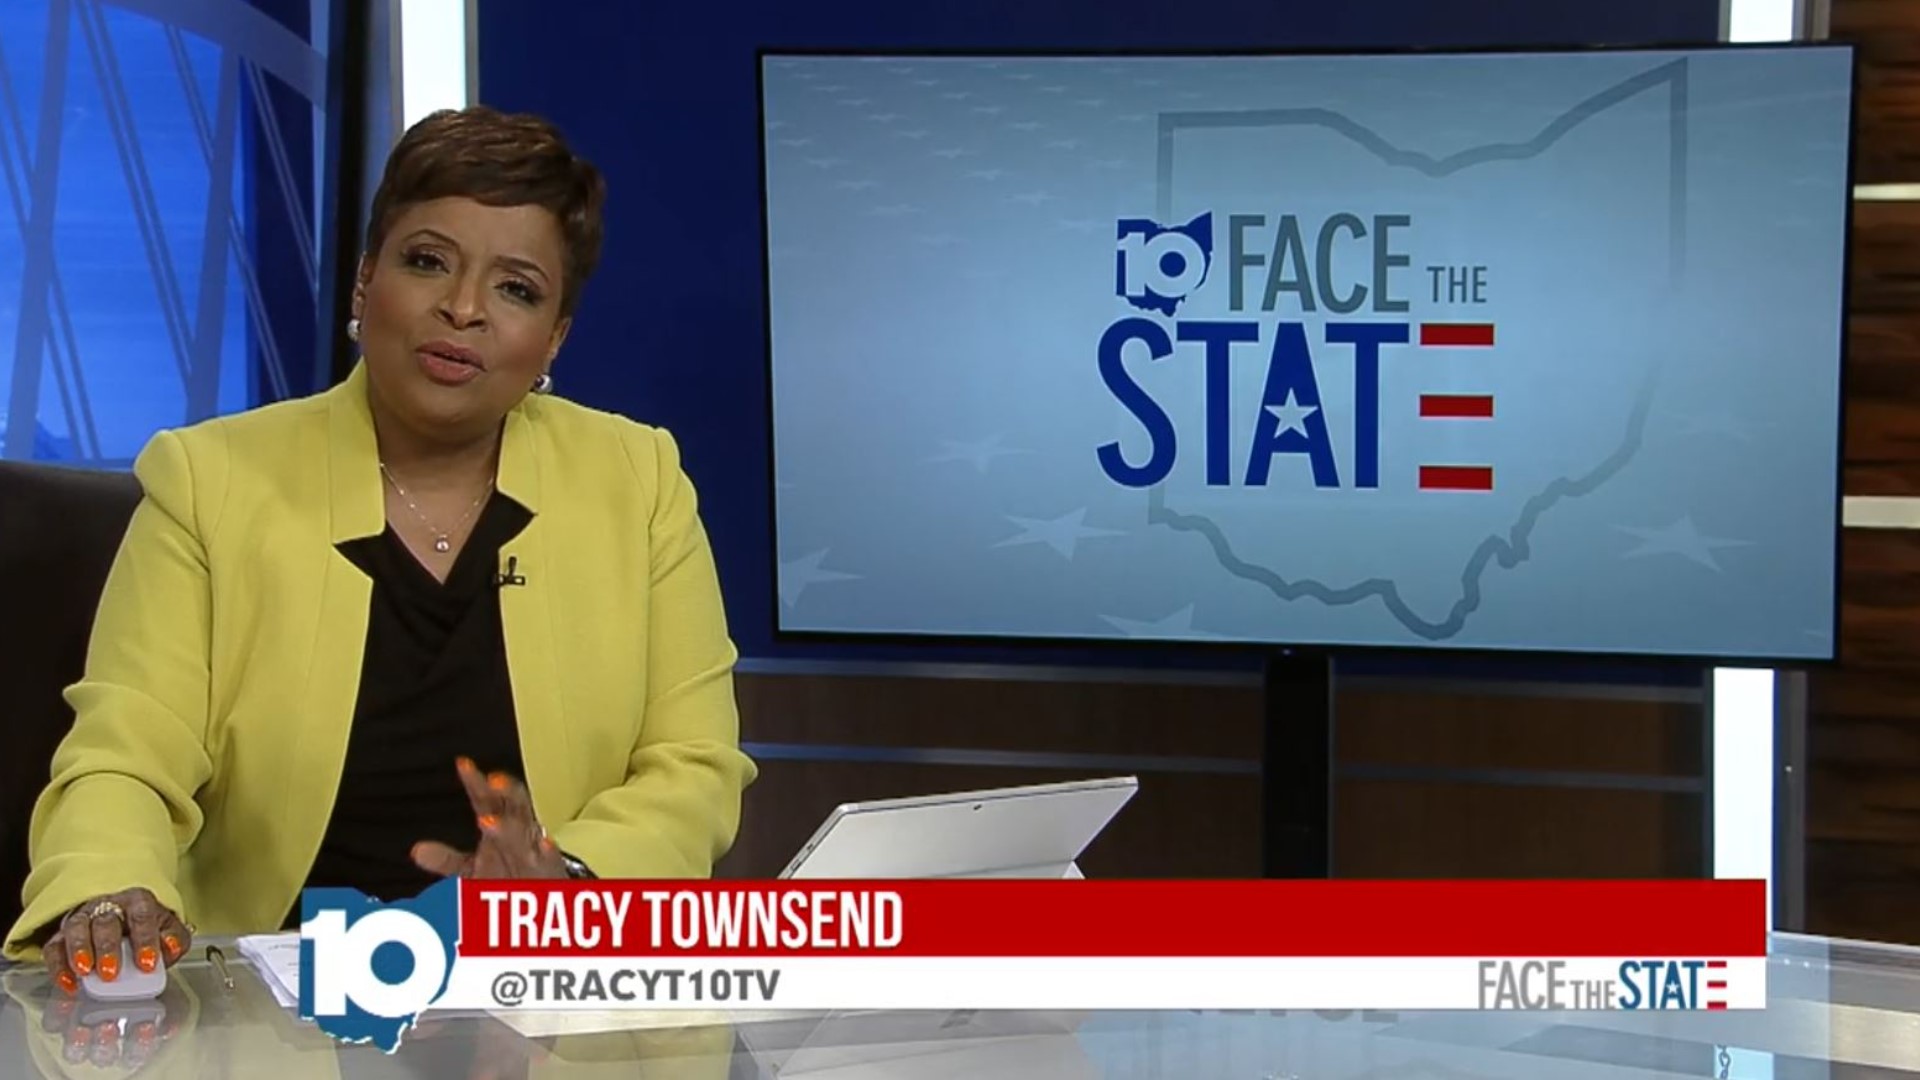 On this week's Face the State, we go one-on-one with the two candidates who are left in the race to represent Ohio's 15th congressional district.